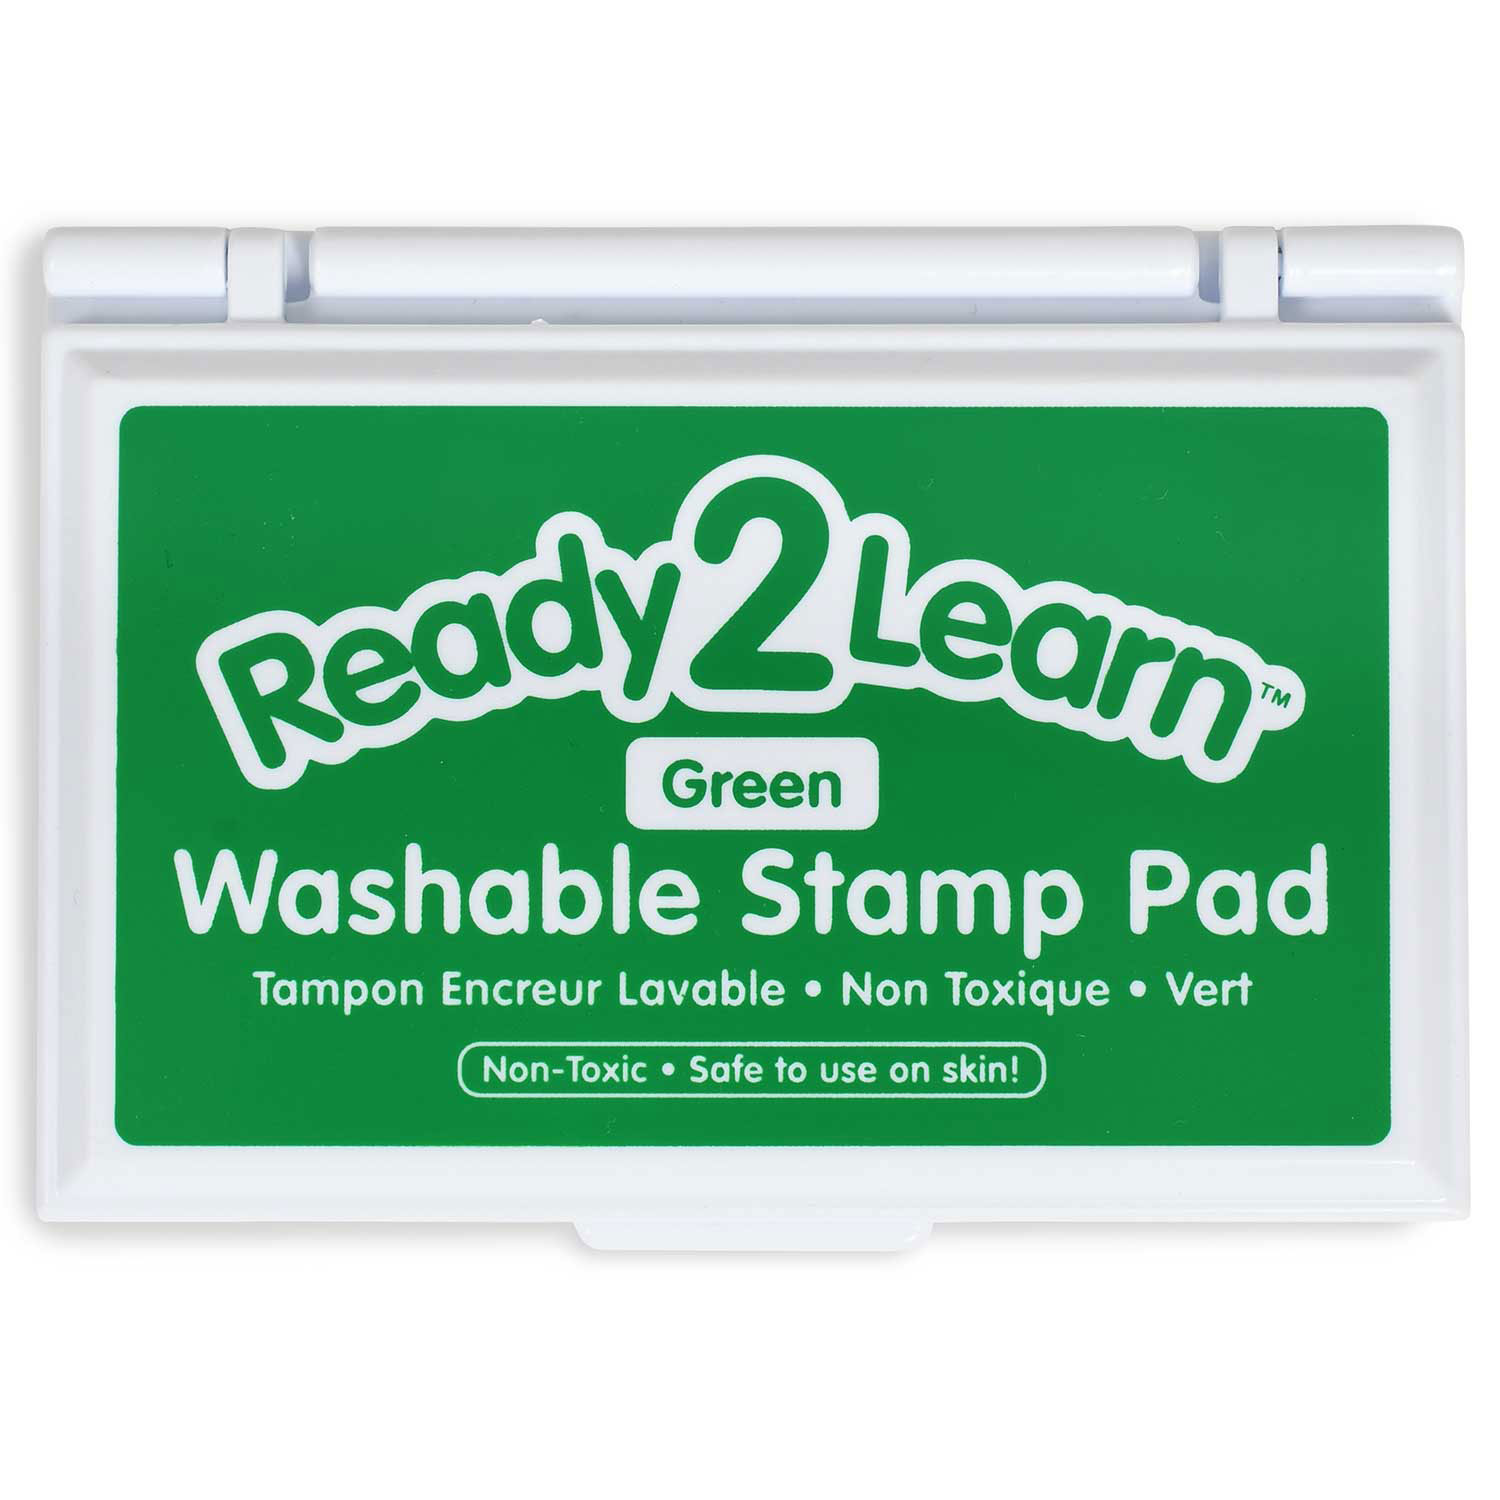 Washable Stamp Pads